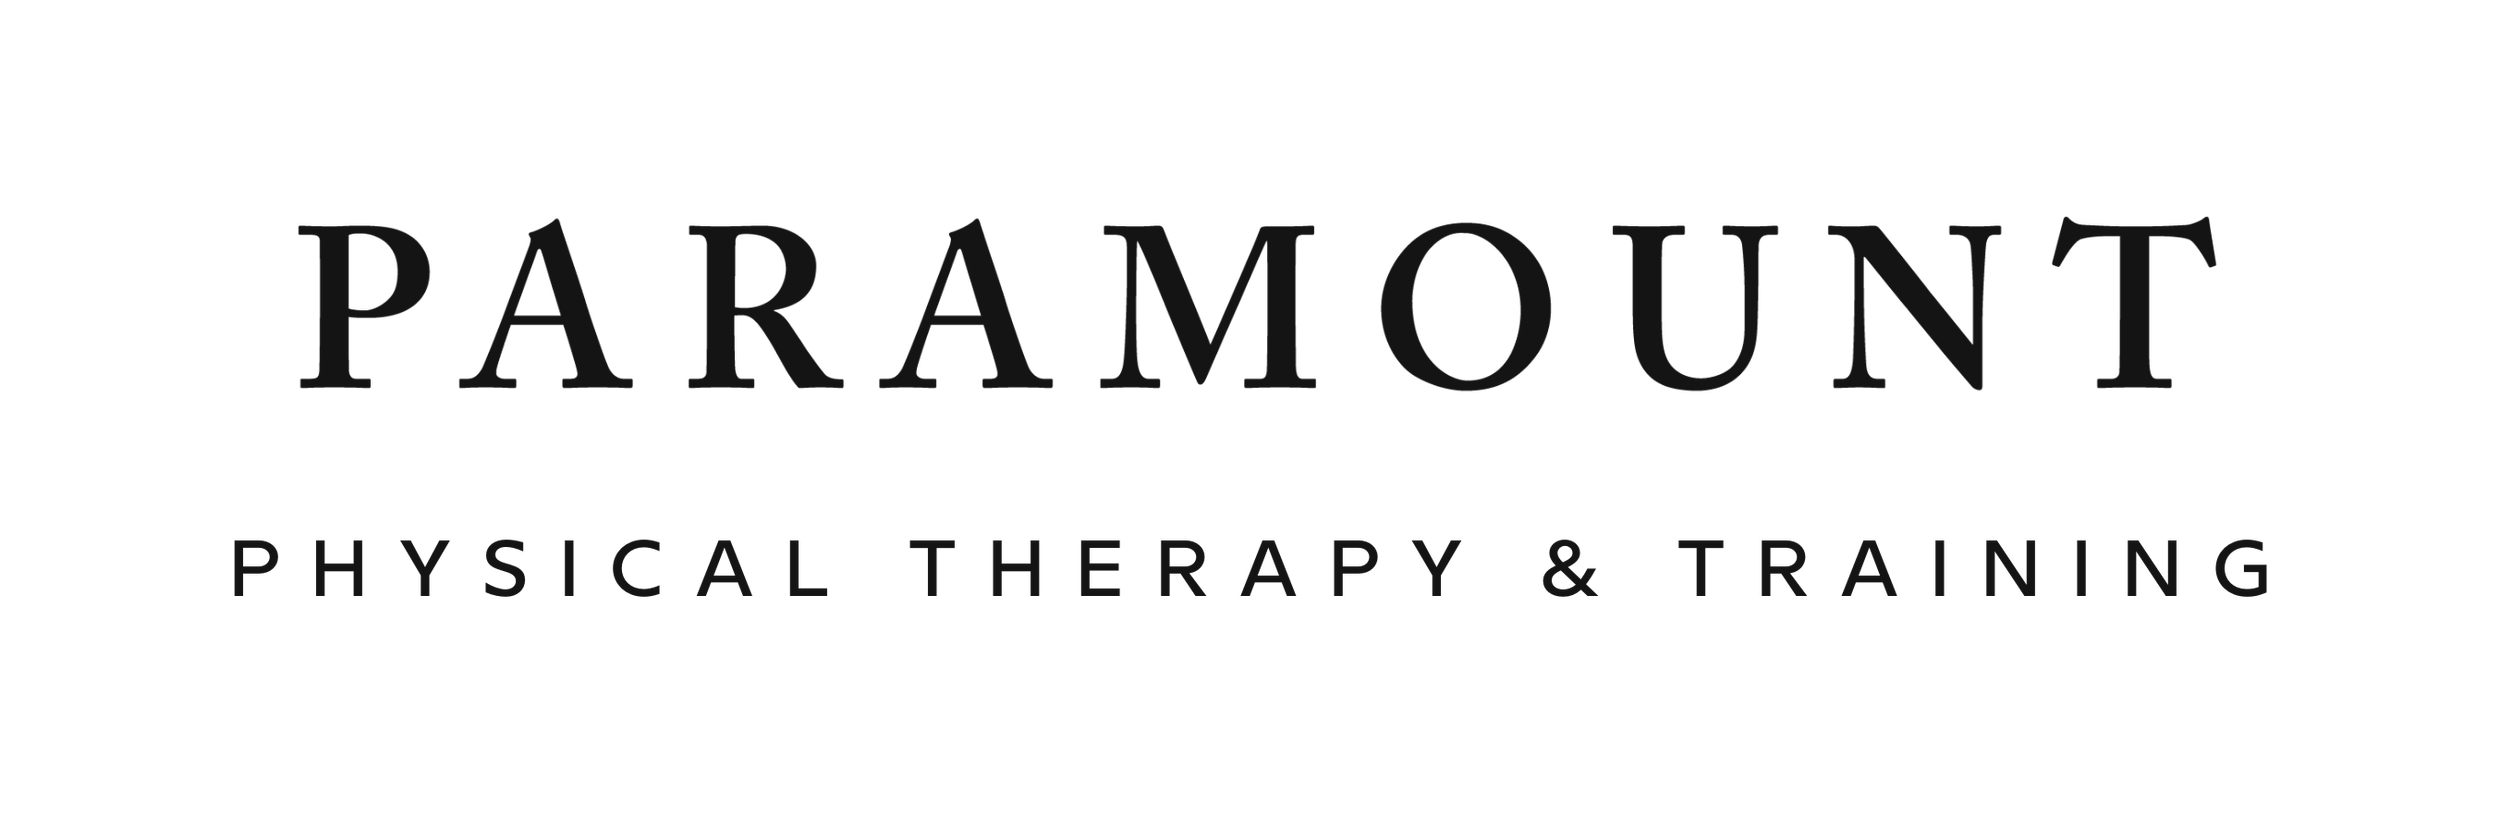 PT & Training Black Logo - Paramount Physical Therapy and Training (1).png